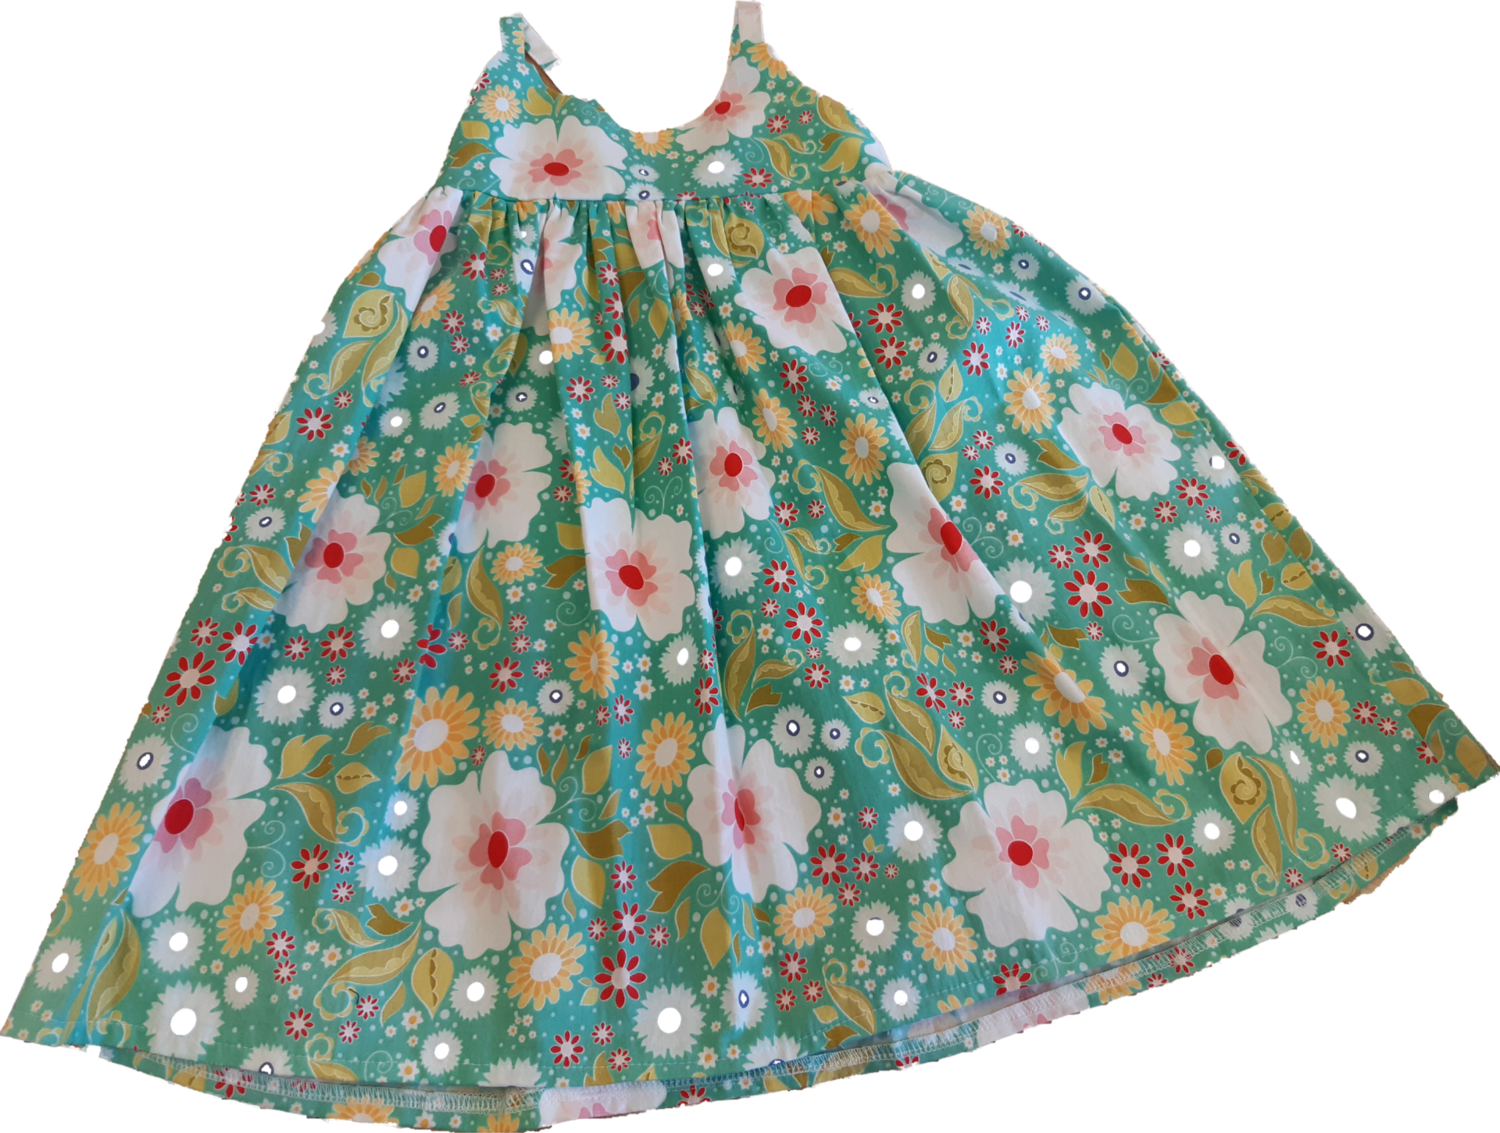 Child's Dress - Floral - Pink Green White